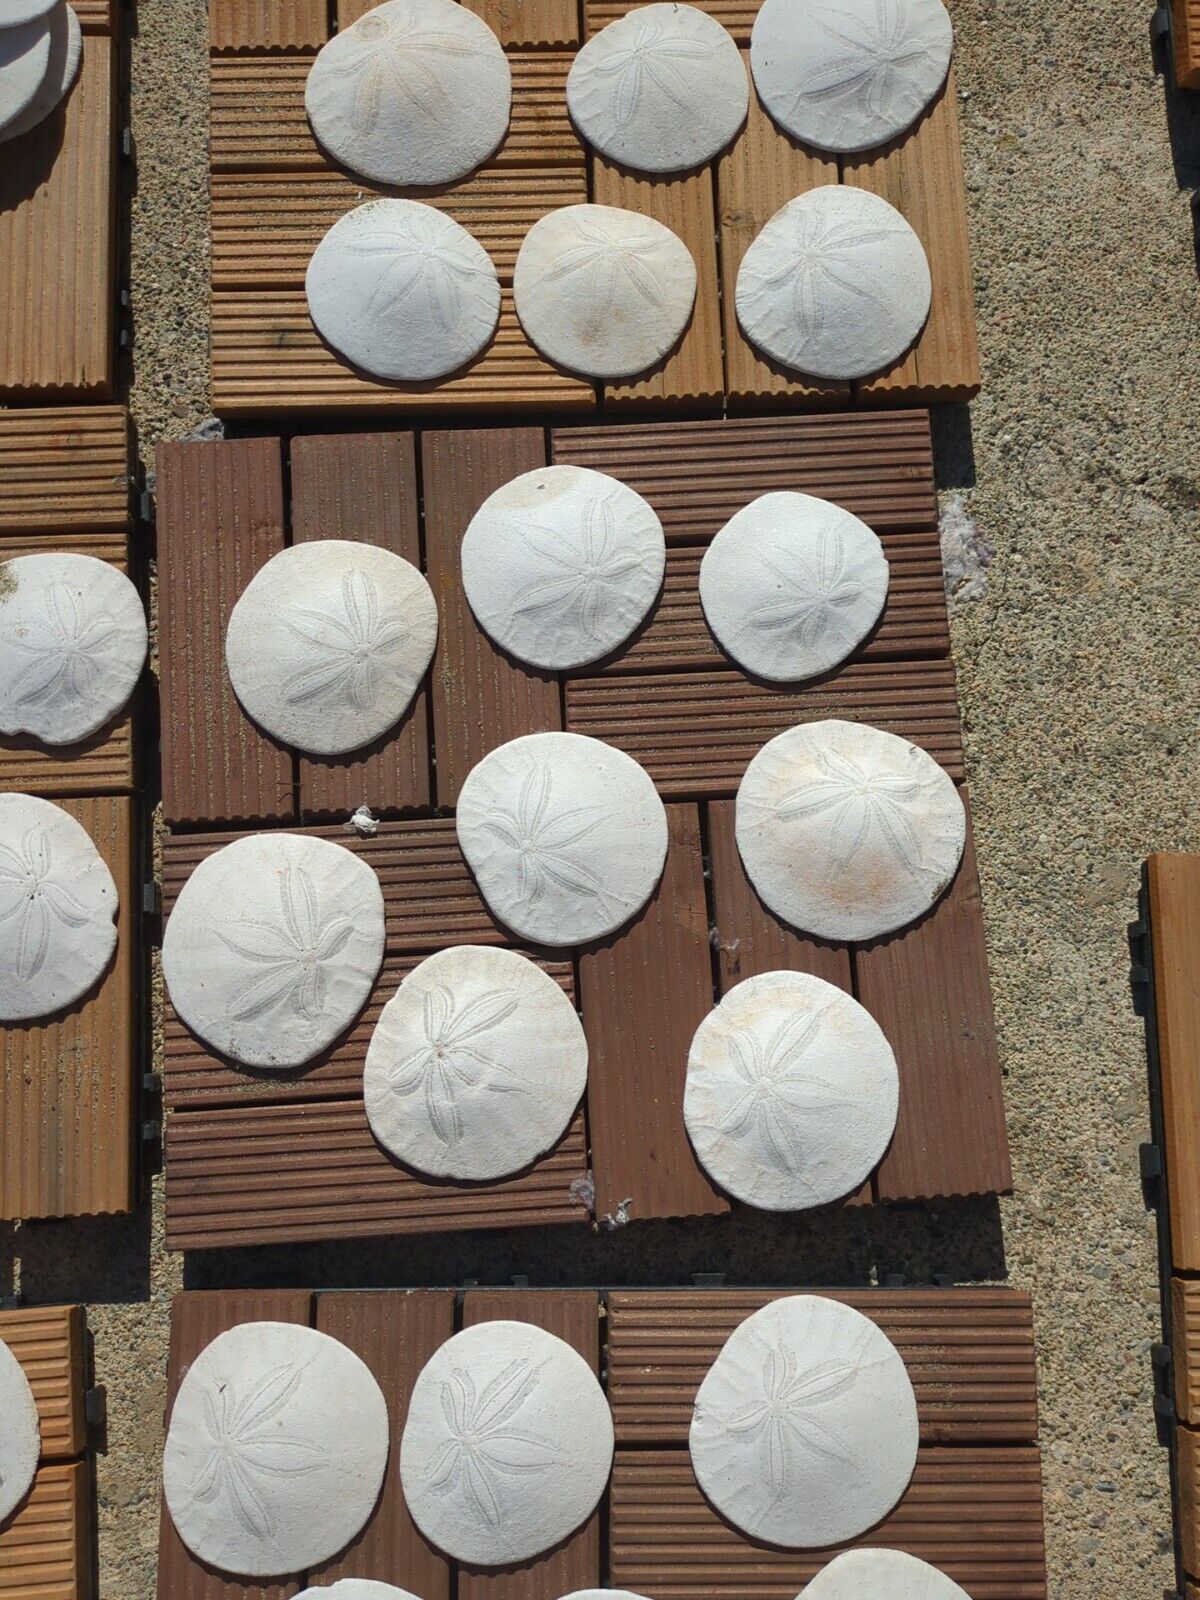  SAND DOLLARS From San Francisco Ocean Beach (3-4inches Wide) (Set Of 20)